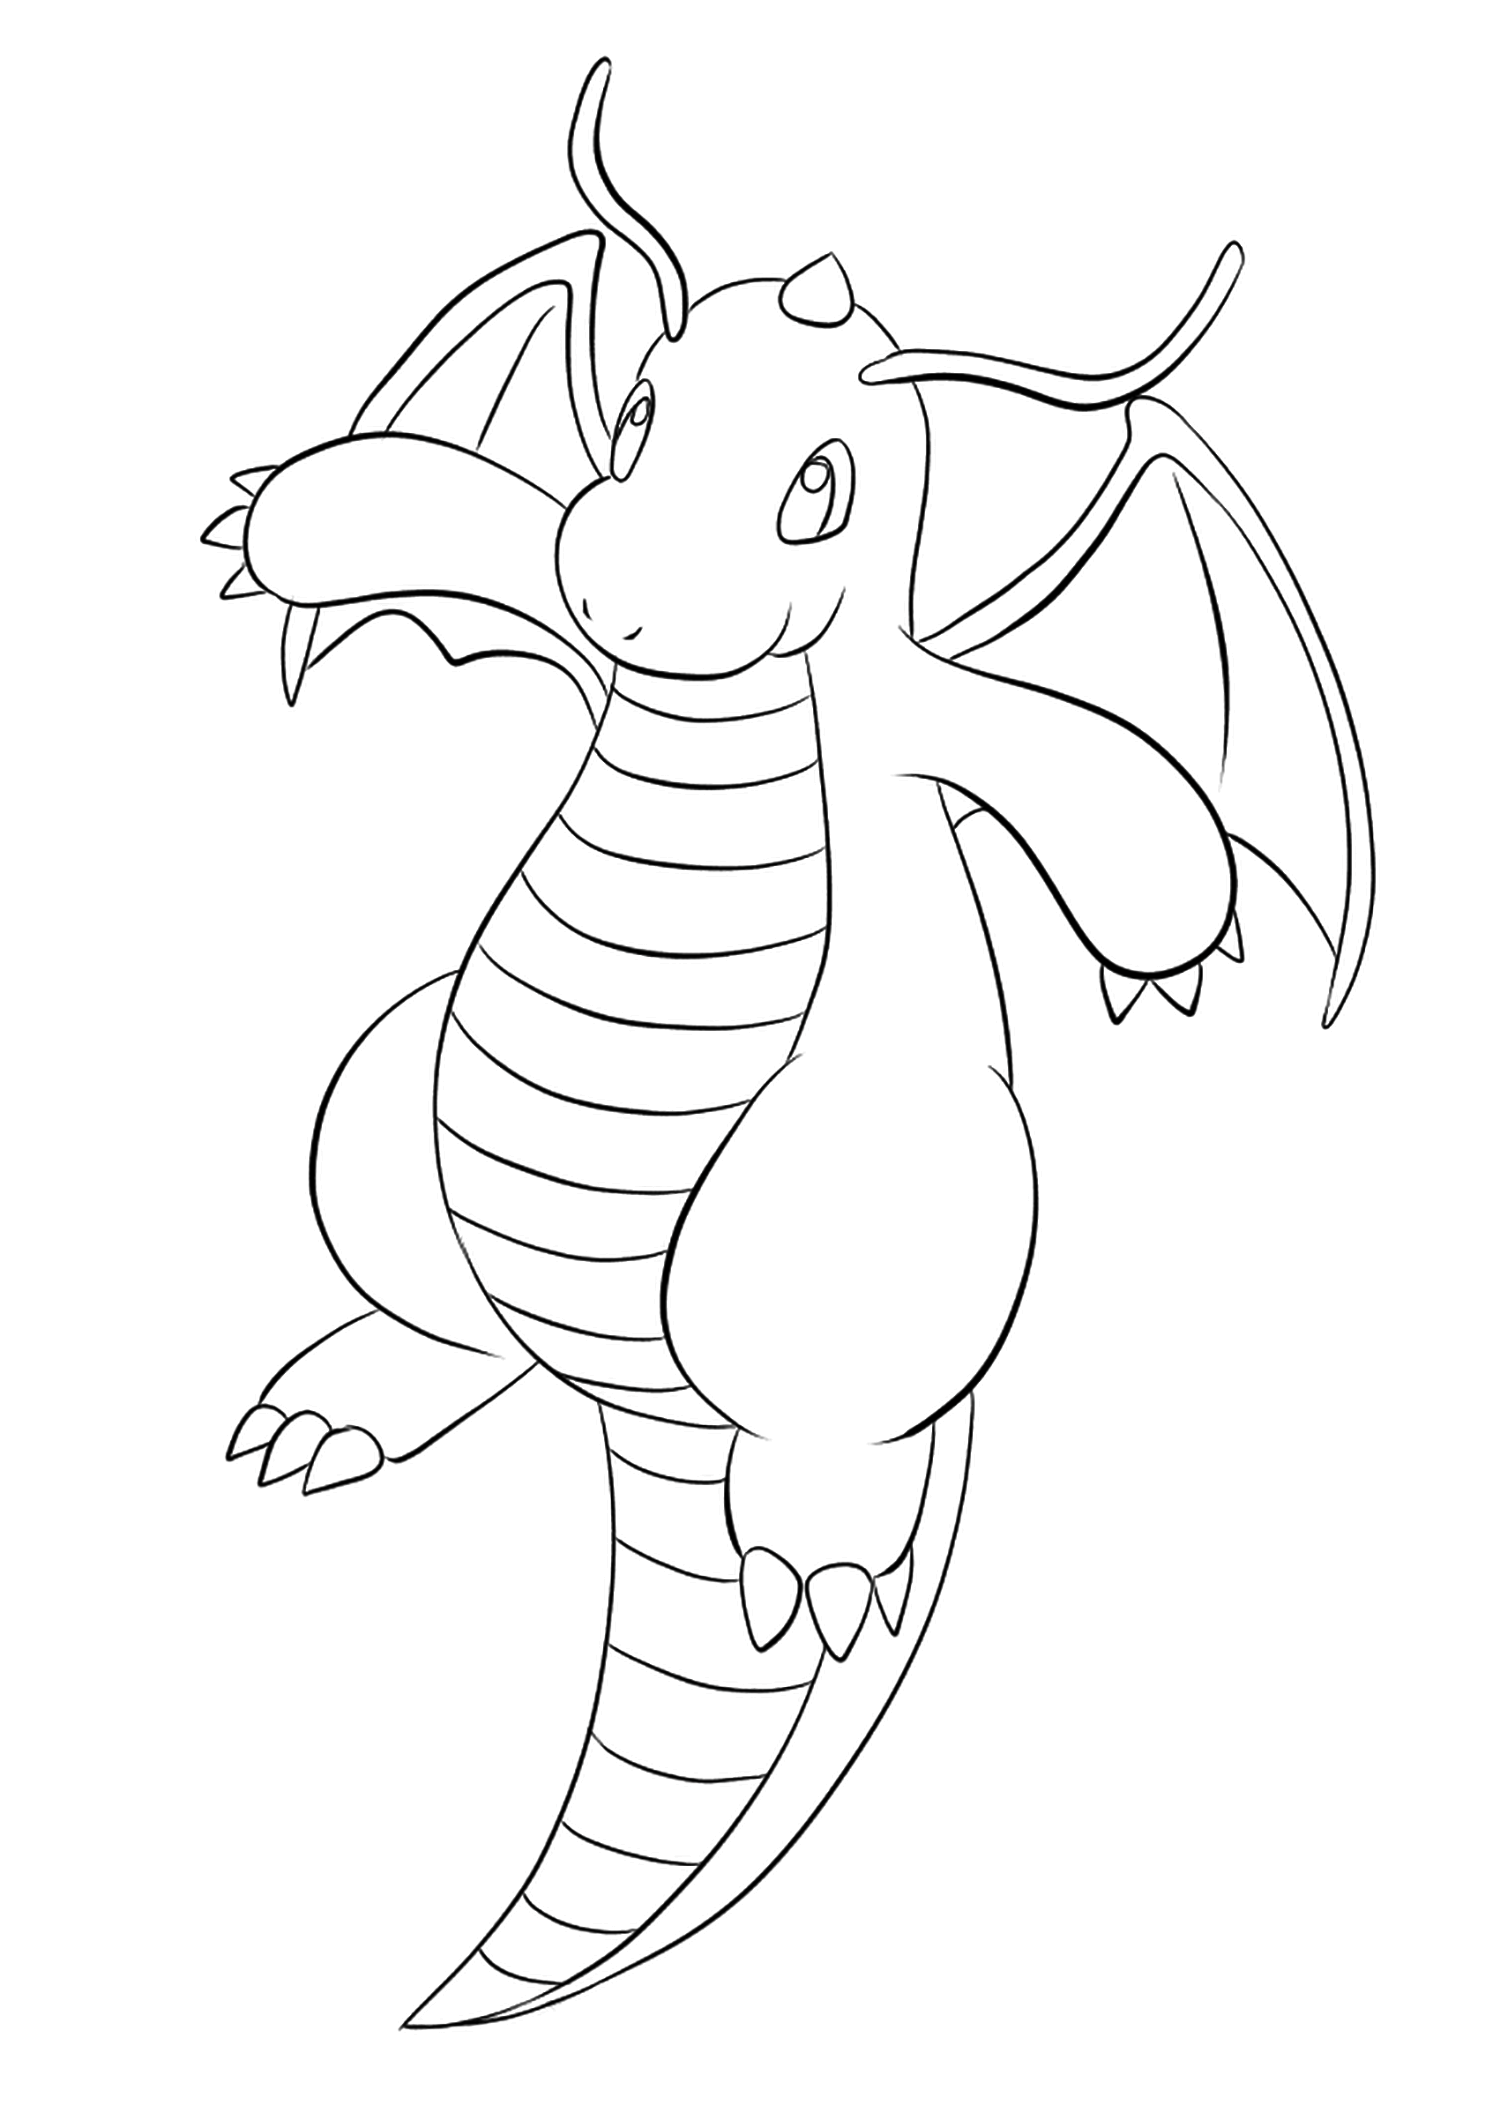 Download Dragonite Coloring Pages - Coloring Home